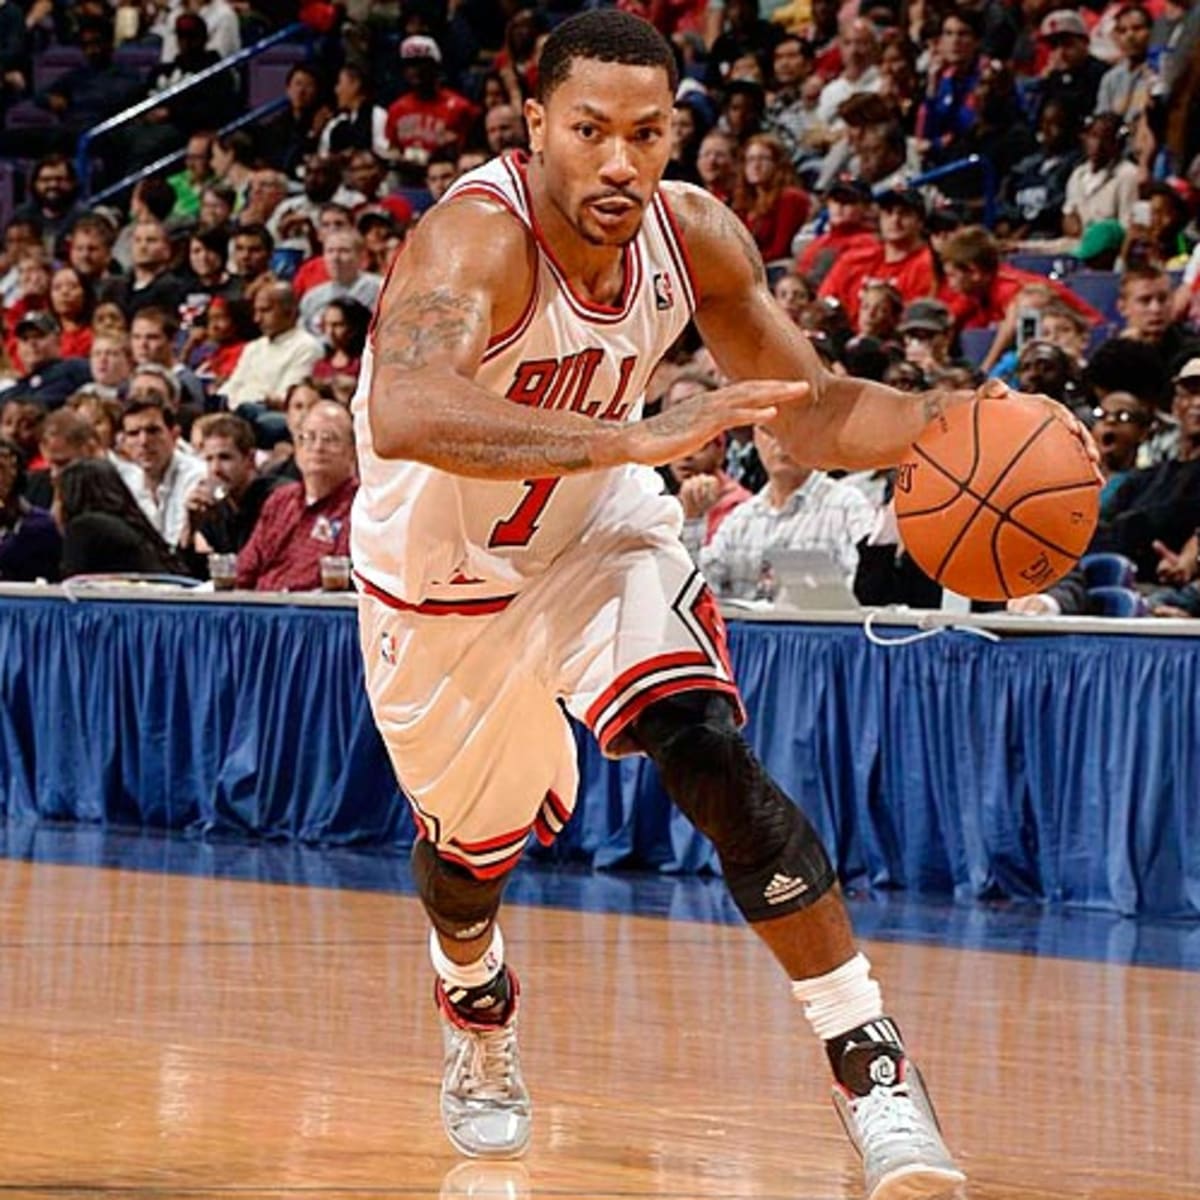 The Derrick Rose Chicago Bulls: The Murphy's Law of NBA Teams